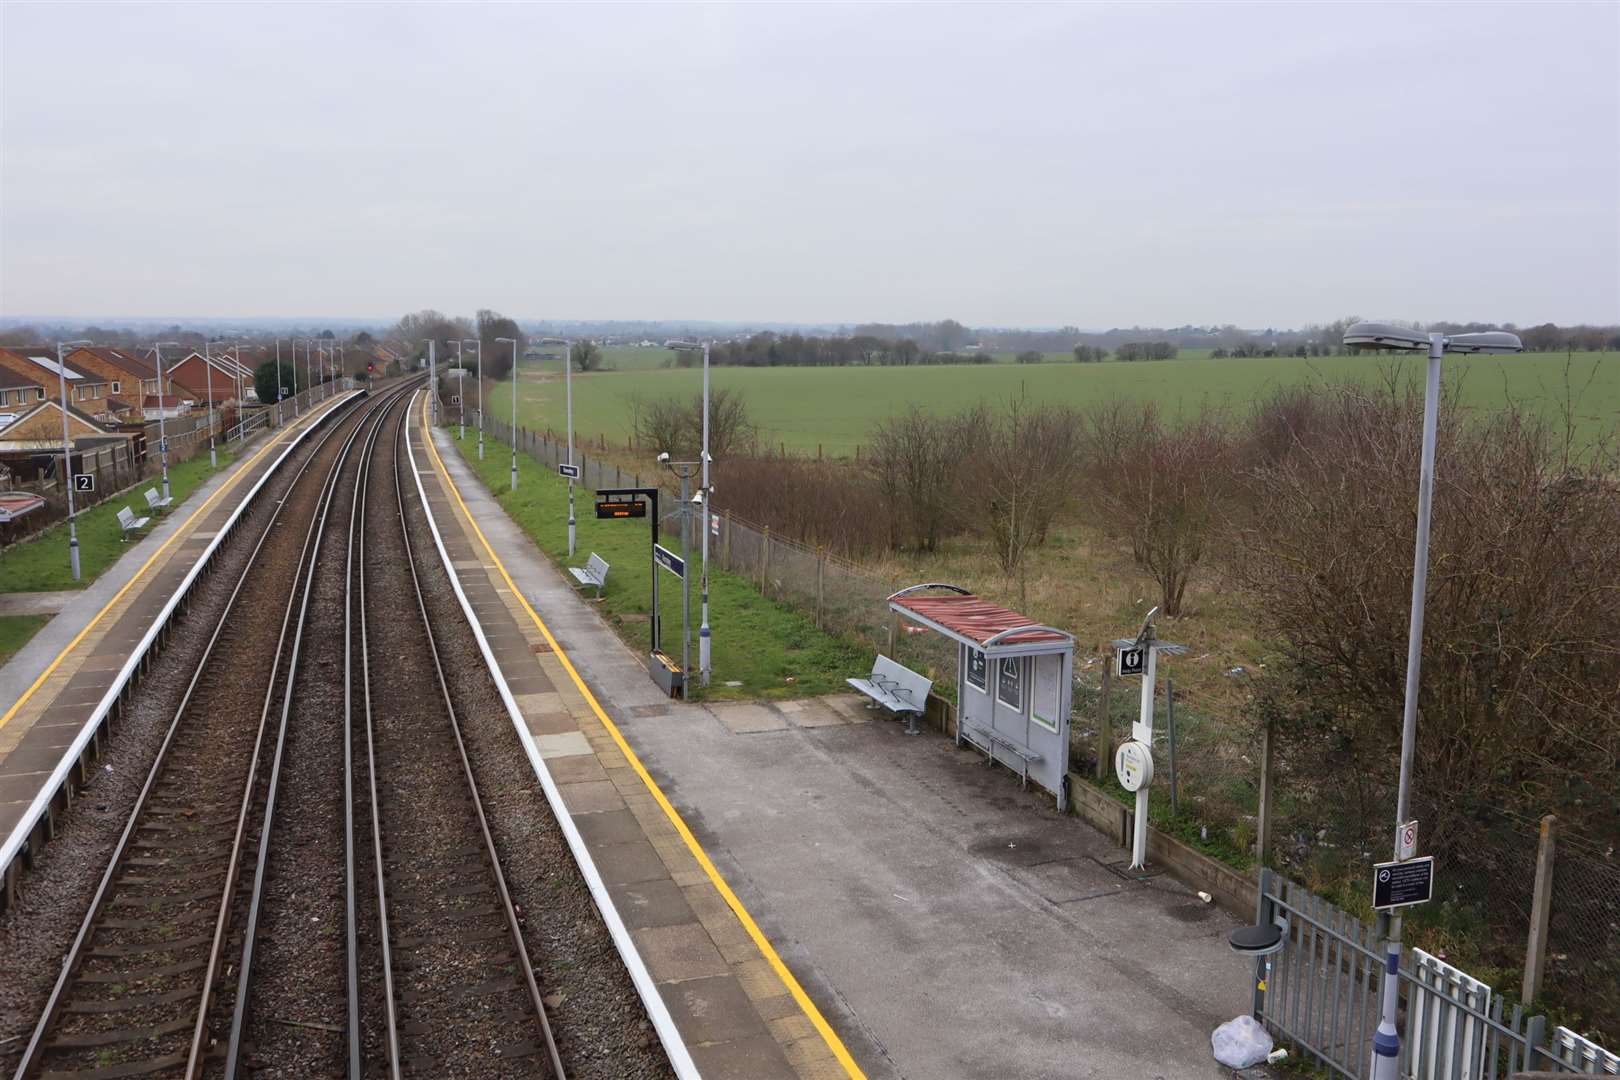 Railway lines at Kemsley Halt showing farmland to the right